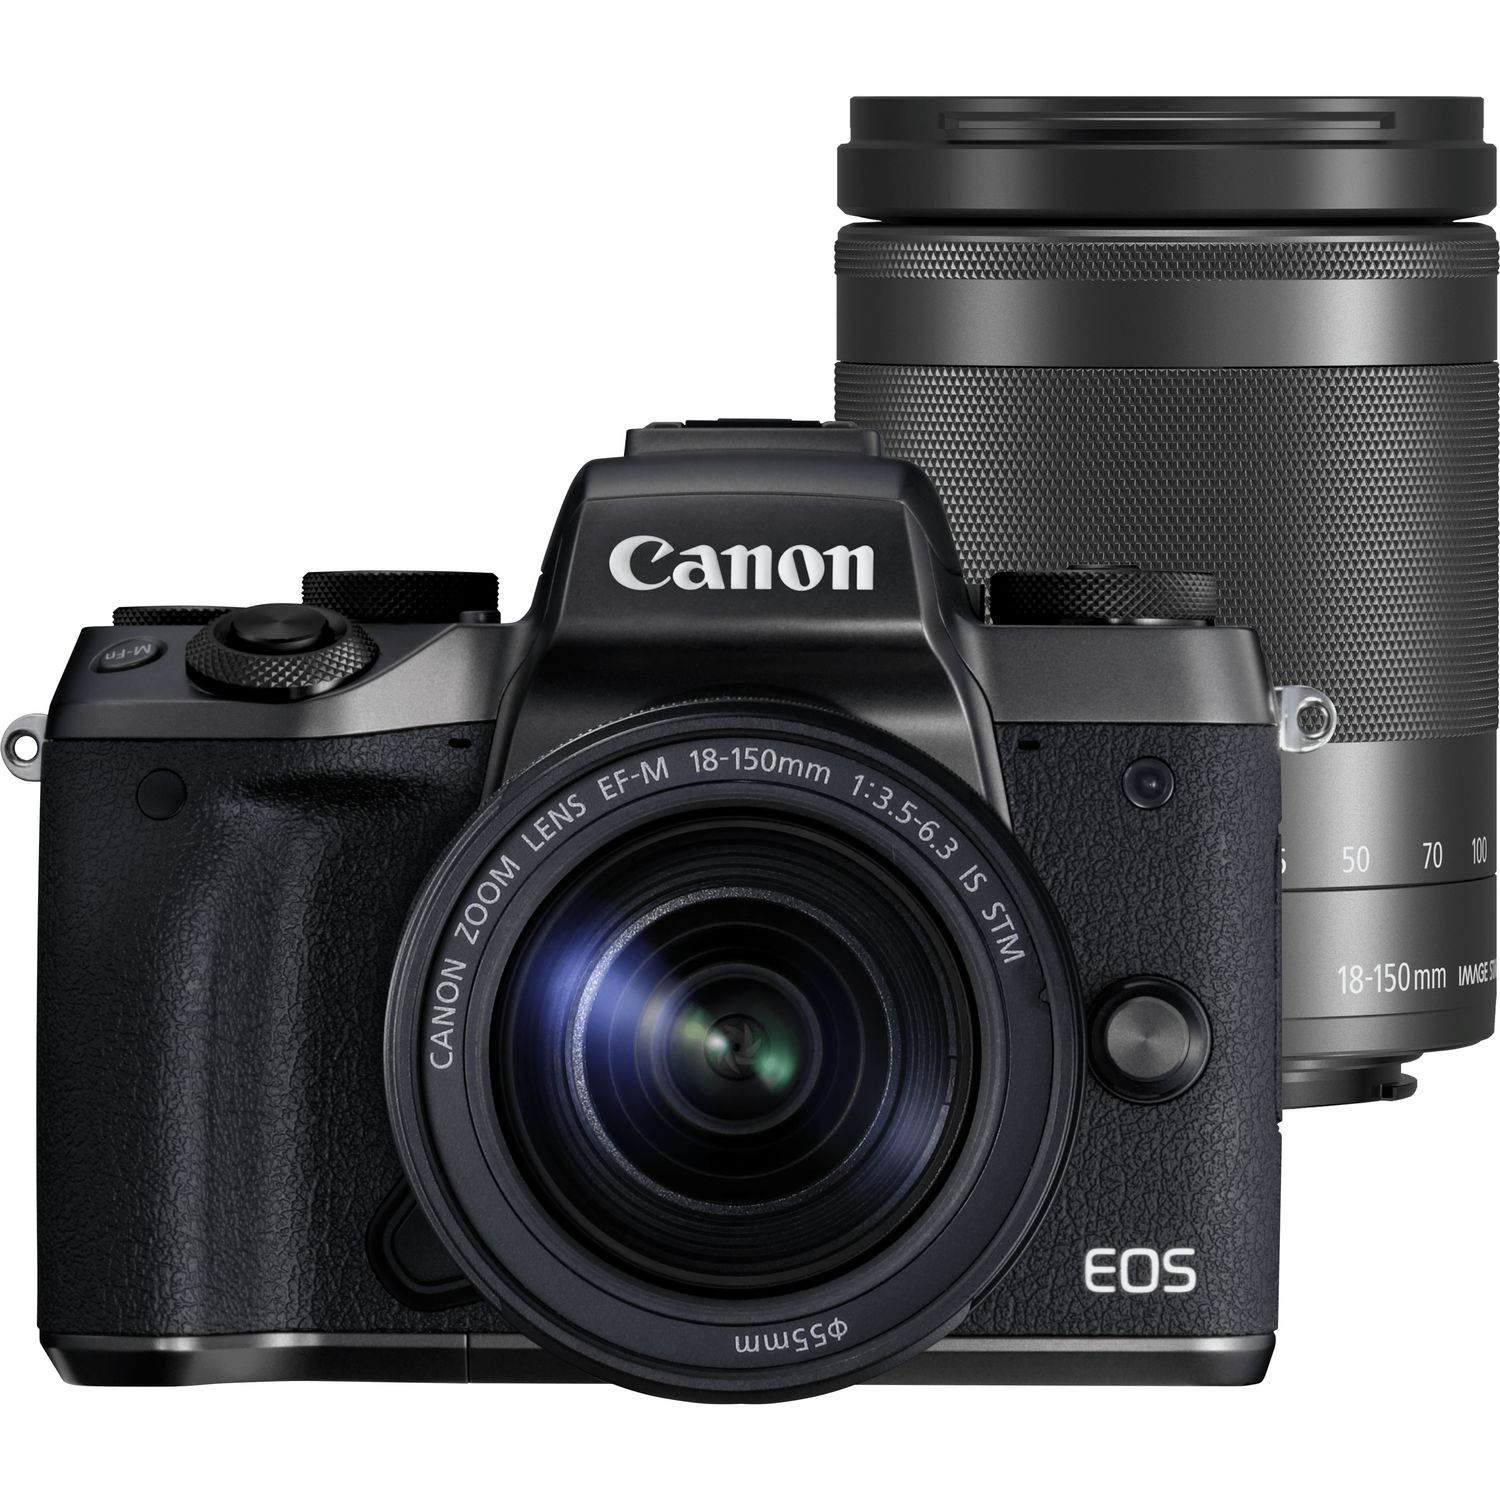 Canon EOS M5 + EF-M 18-150mm f/3.5-6.3 IS STM in Stopgezet — Canon